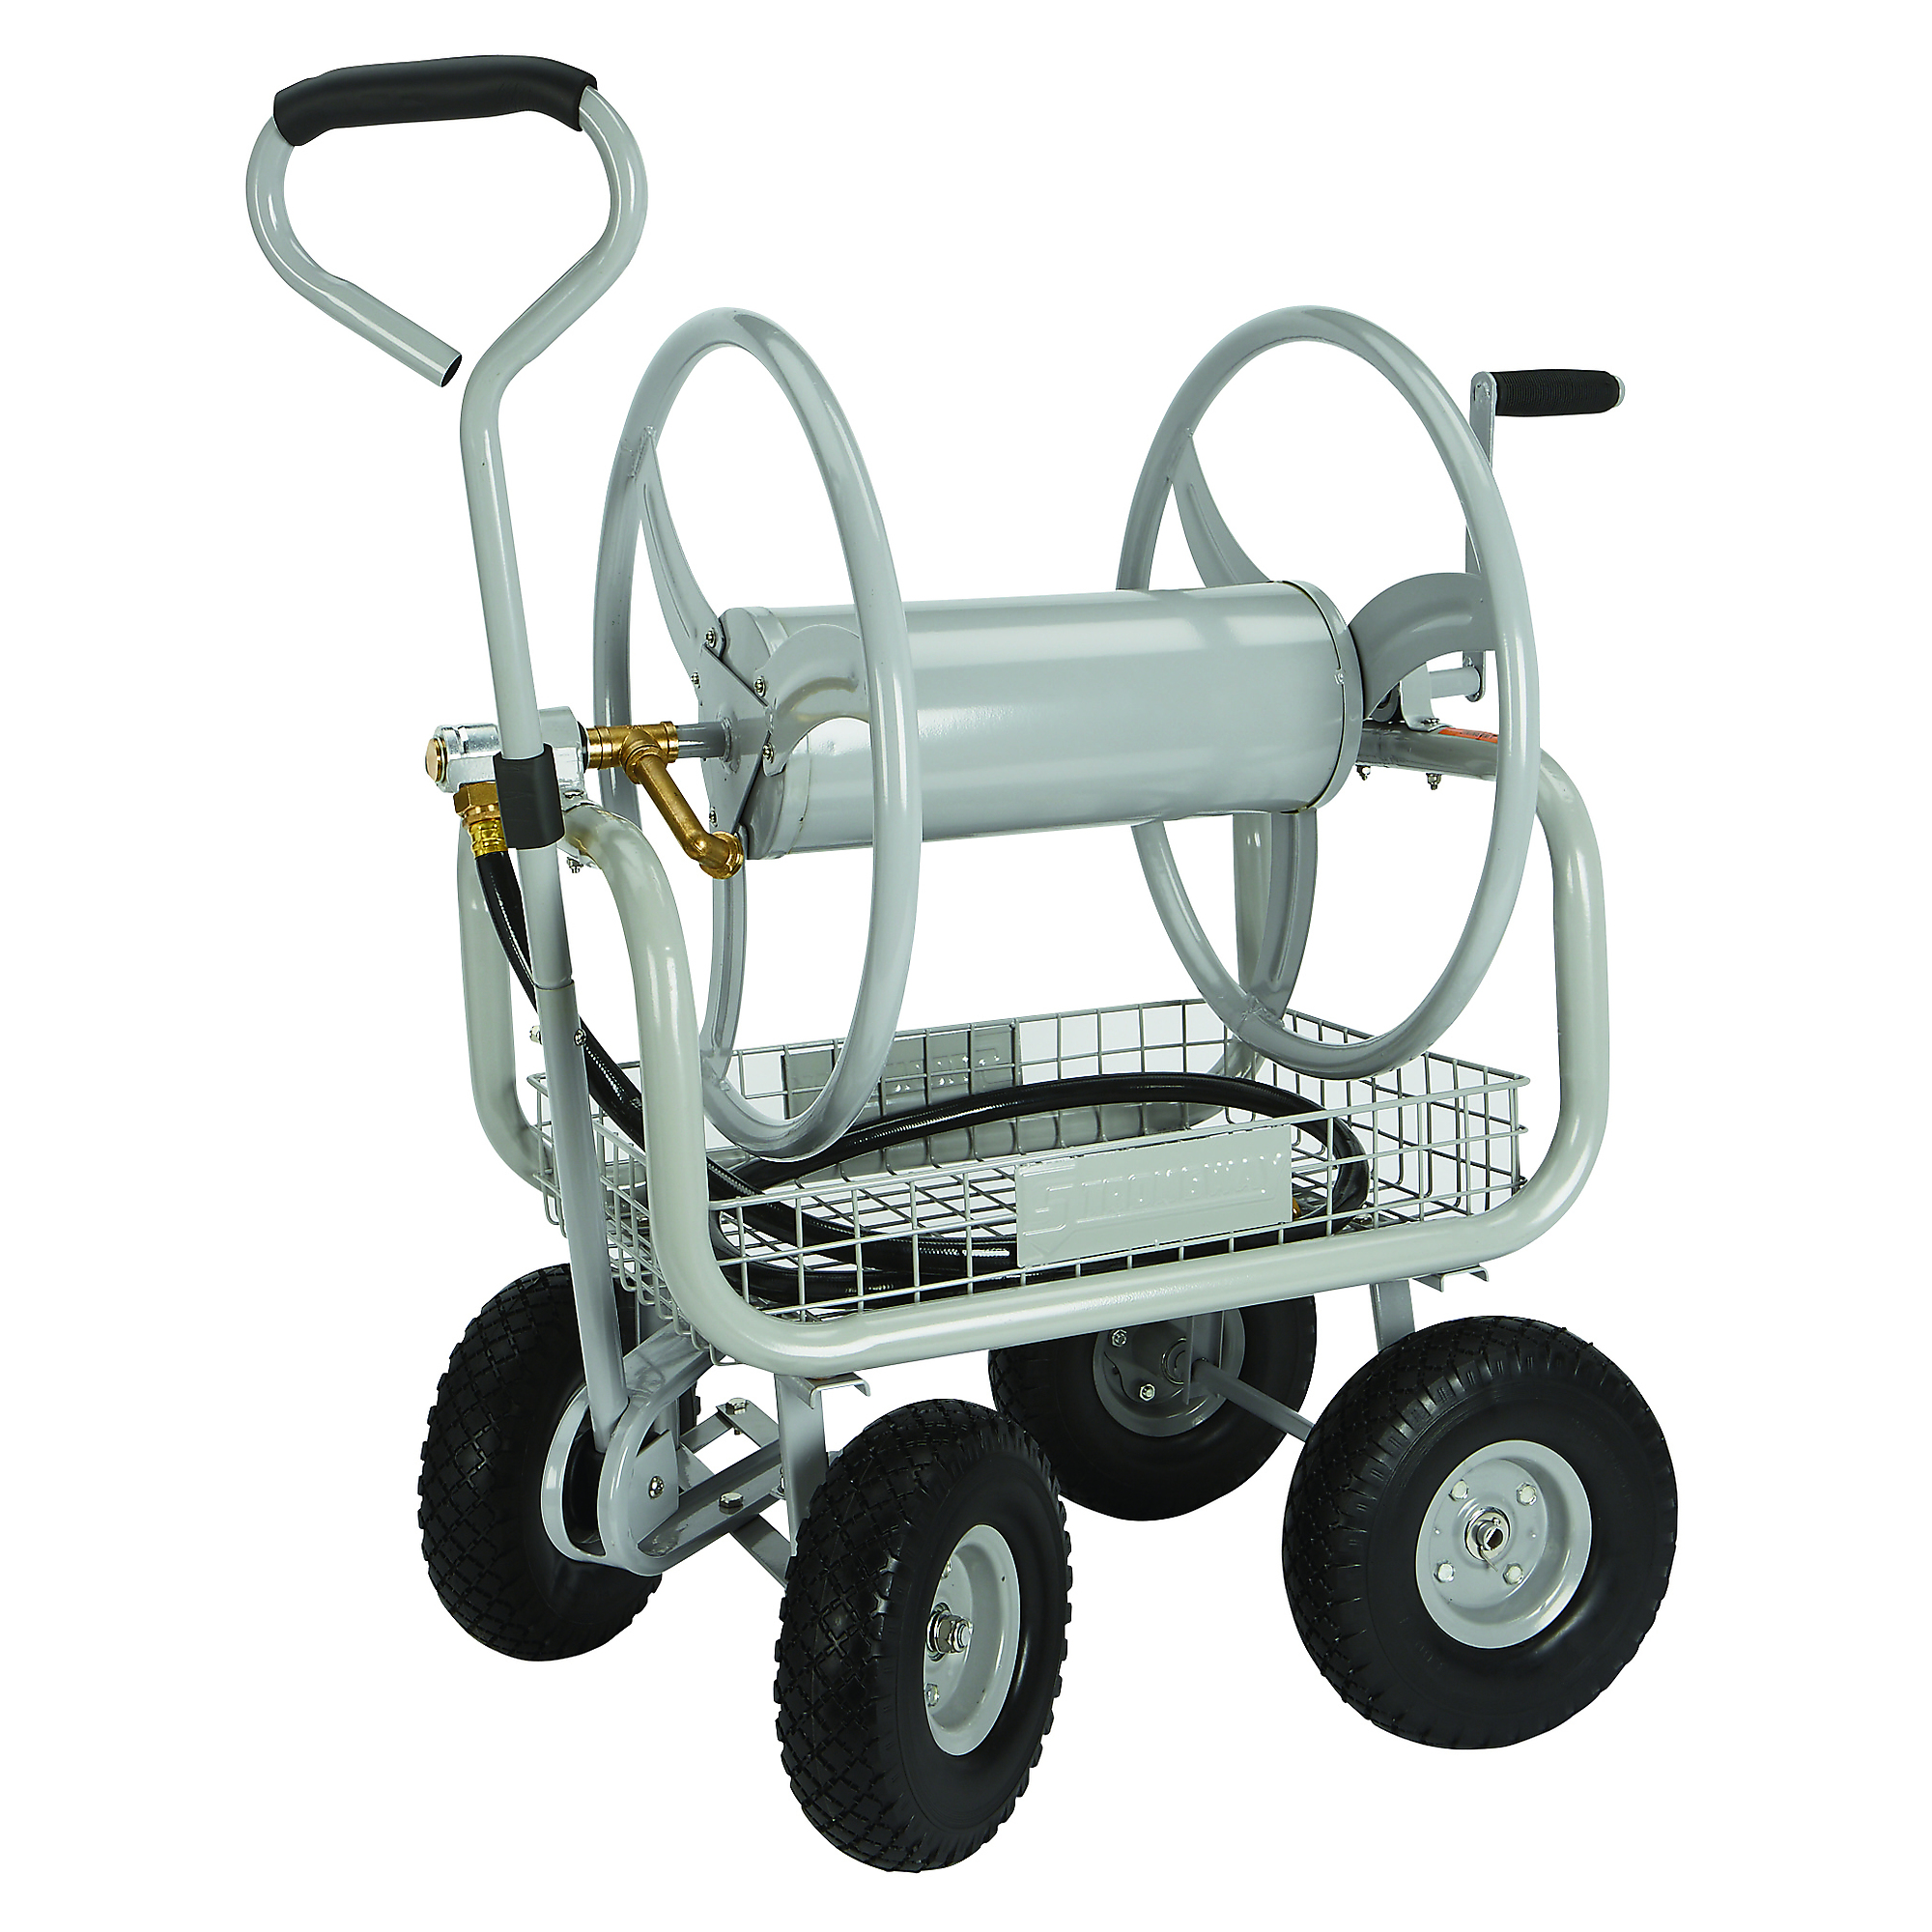 Strongway Hose Reel Cart, Holds 5/8Inch x 400ft. Hose